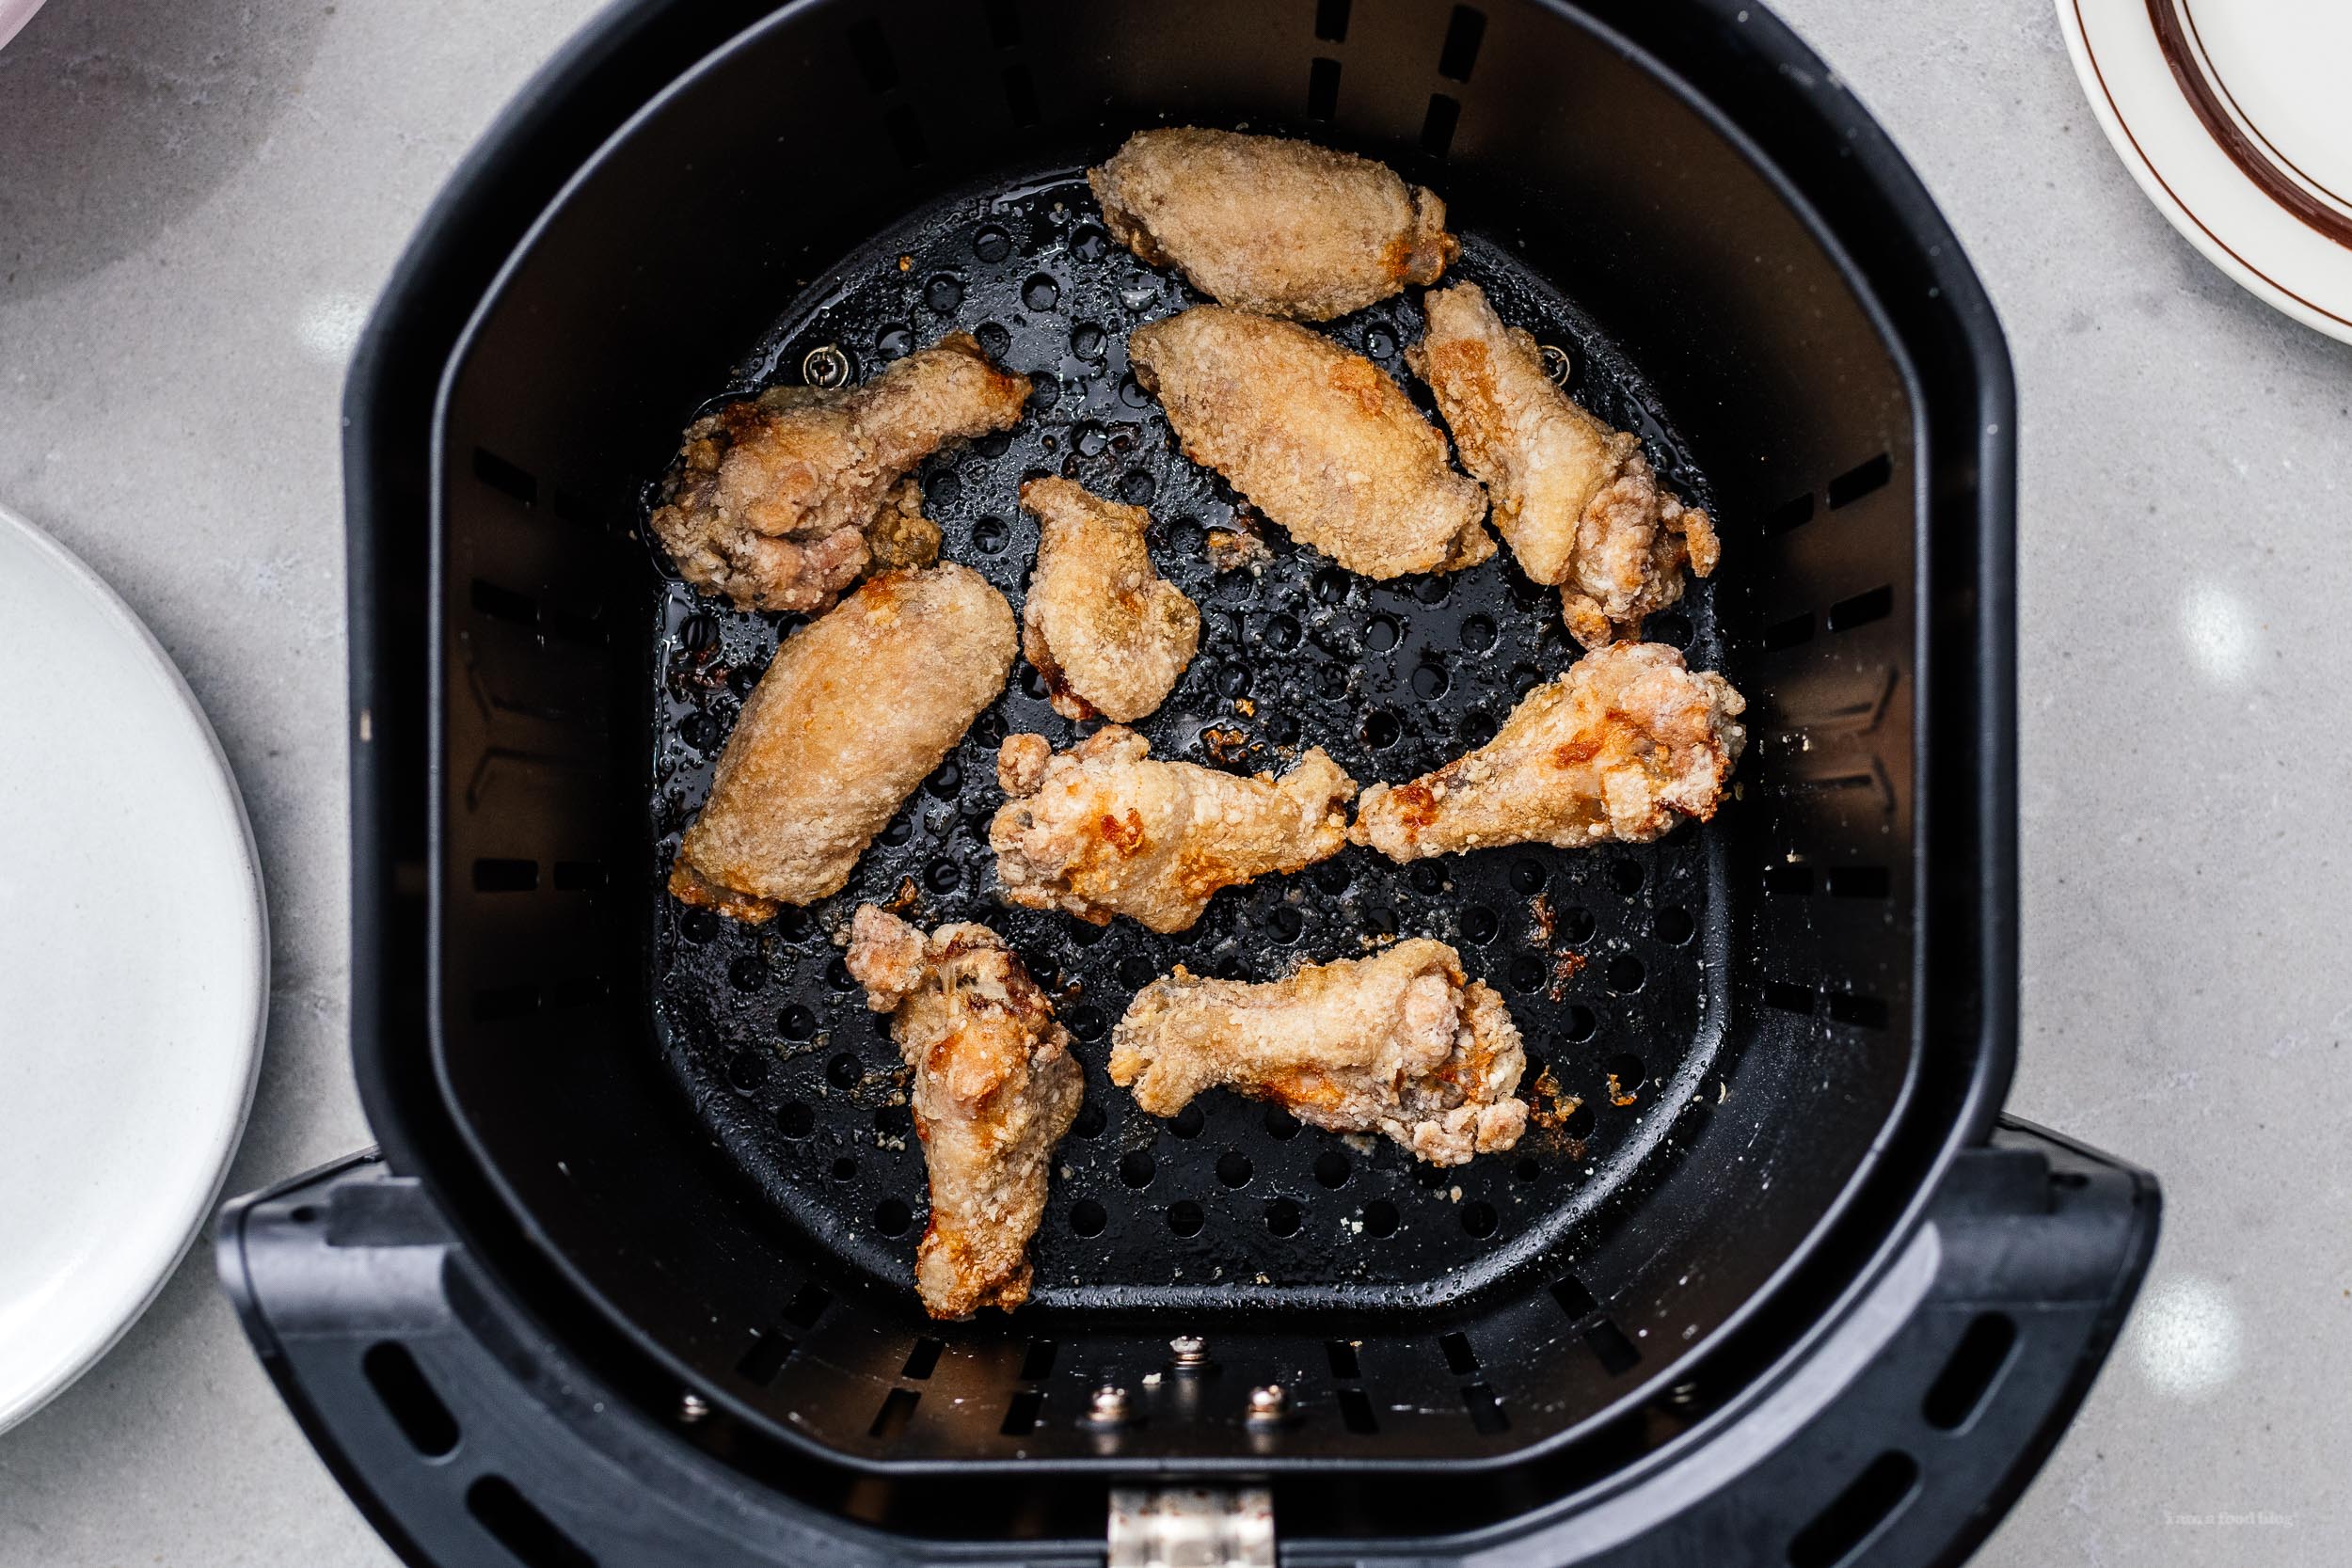 How to Make the Crunchiest Asian Fried Chicken in an Air Fryer